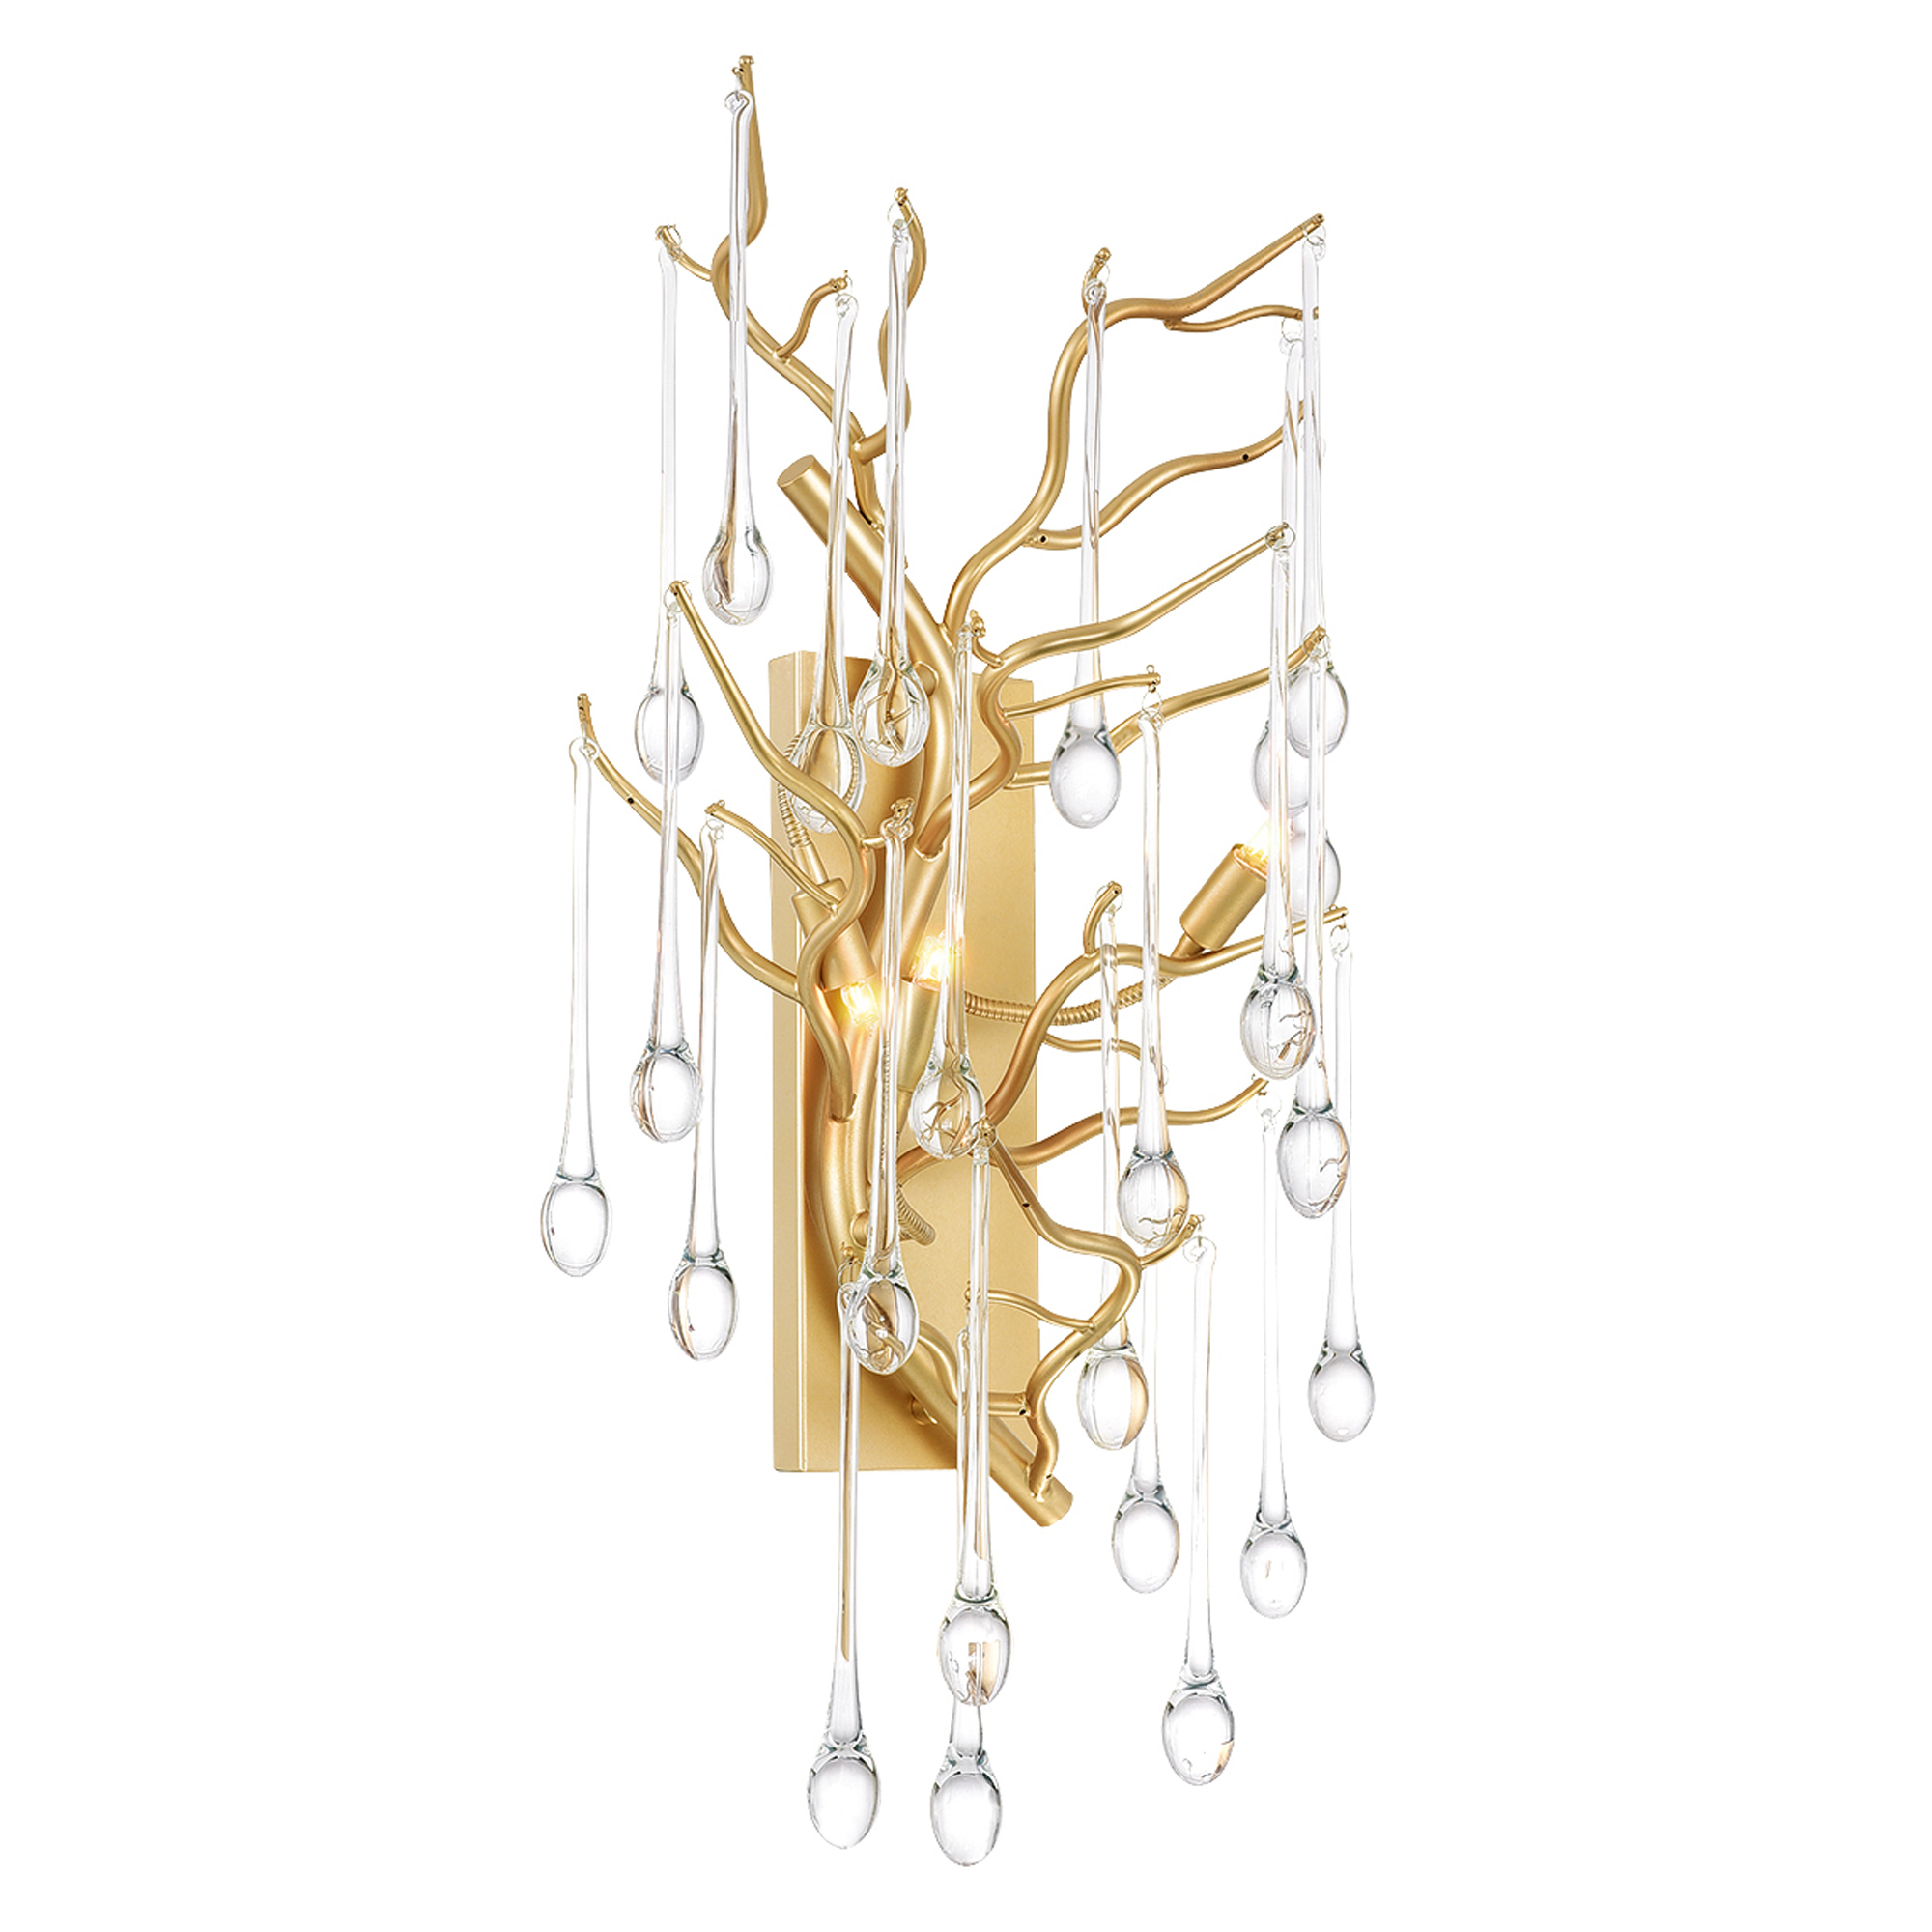 Anita 3 Light Wall Sconce With Gold Leaf Finish